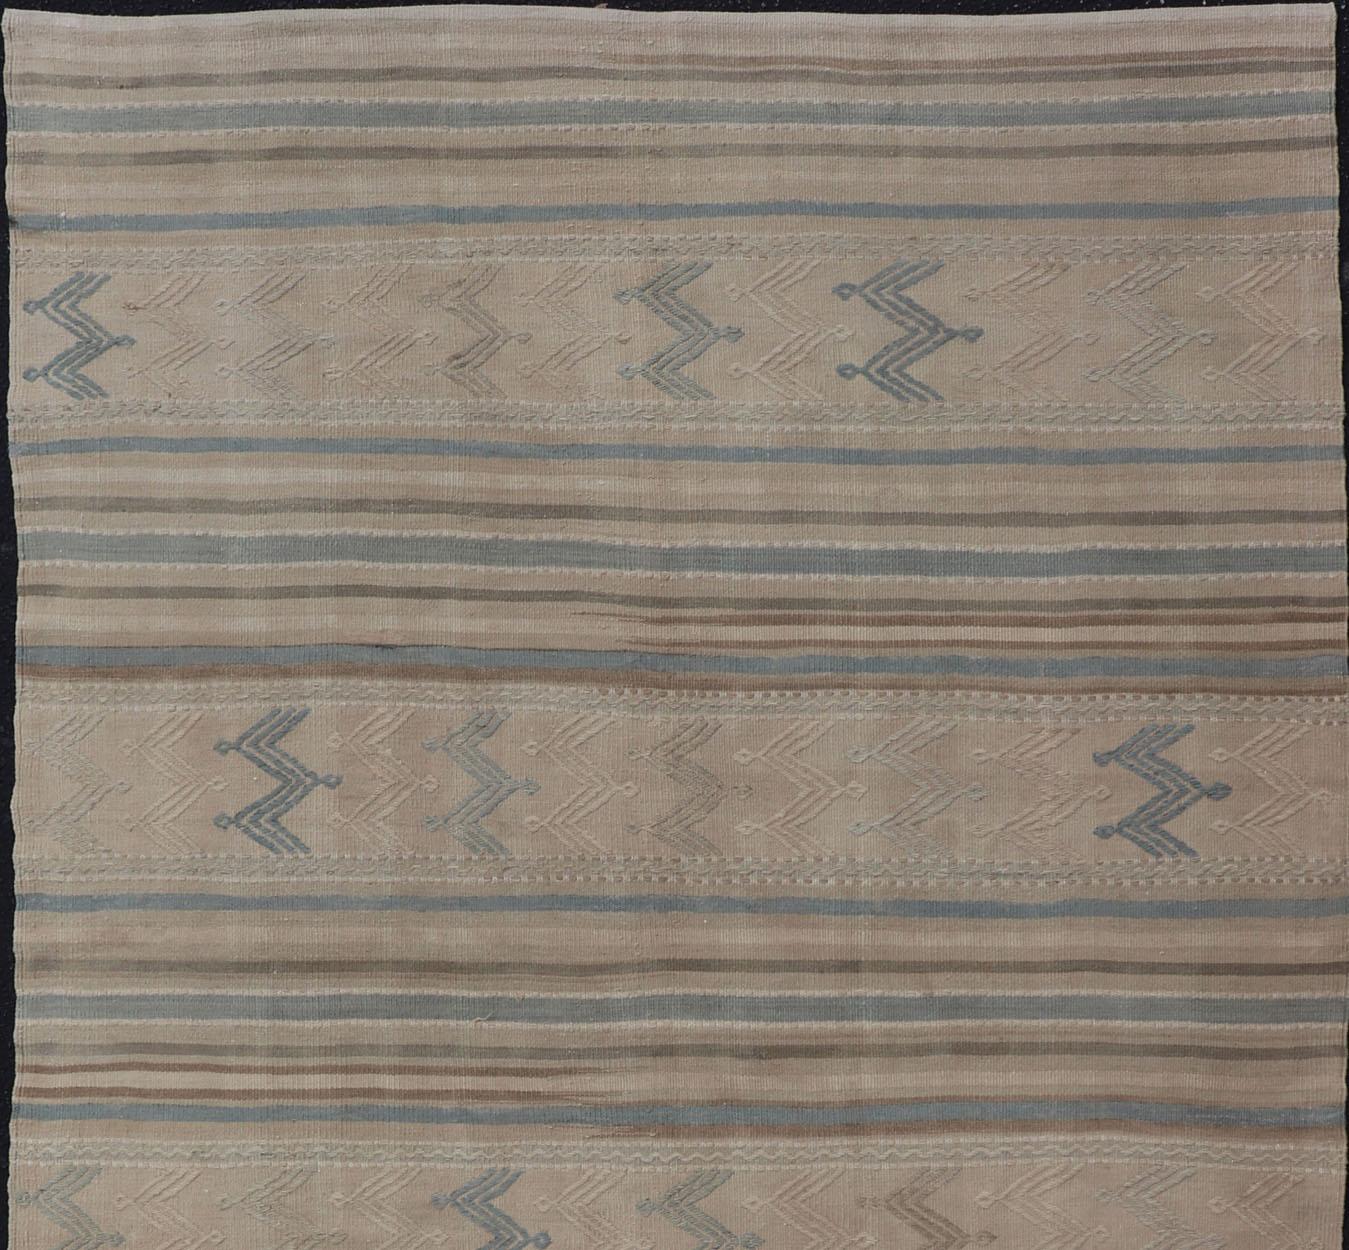 Hand-Woven Turkish Vintage Kilim With Embroidered Motifs in Light Tan, Blue L. Brown For Sale